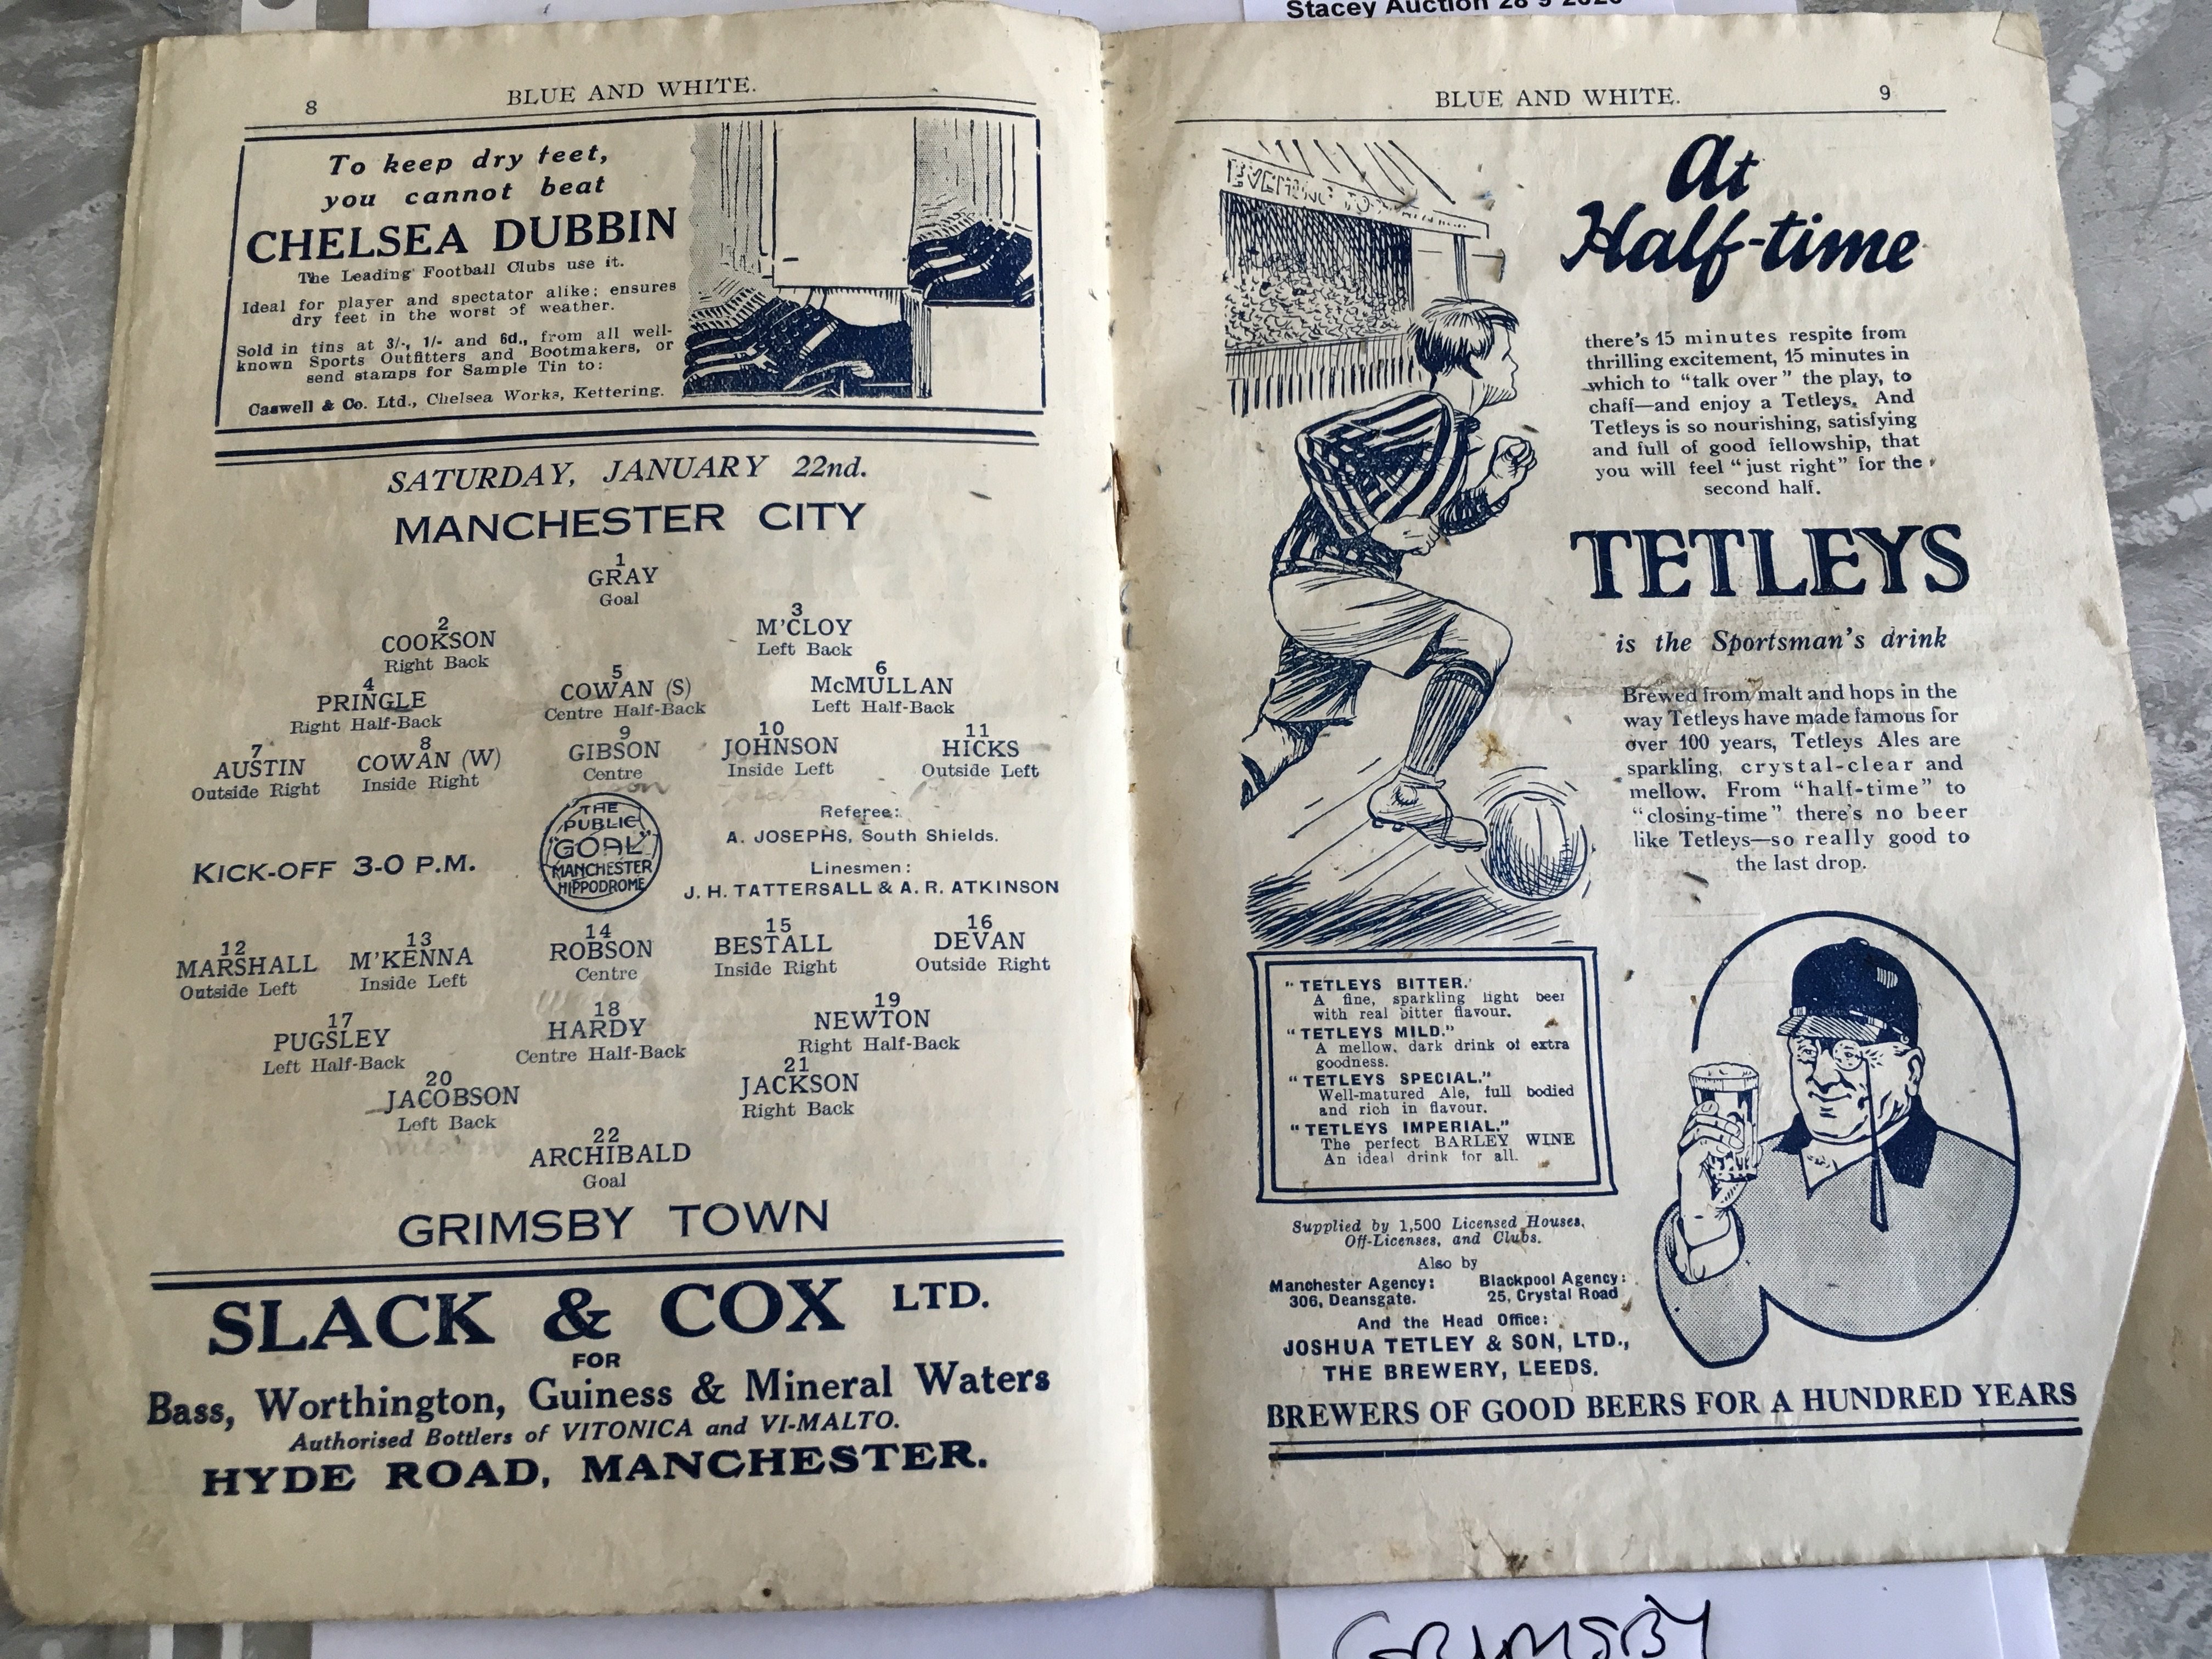 1926/27 Manchester City v Grimsby Town Football Pr - Image 2 of 2